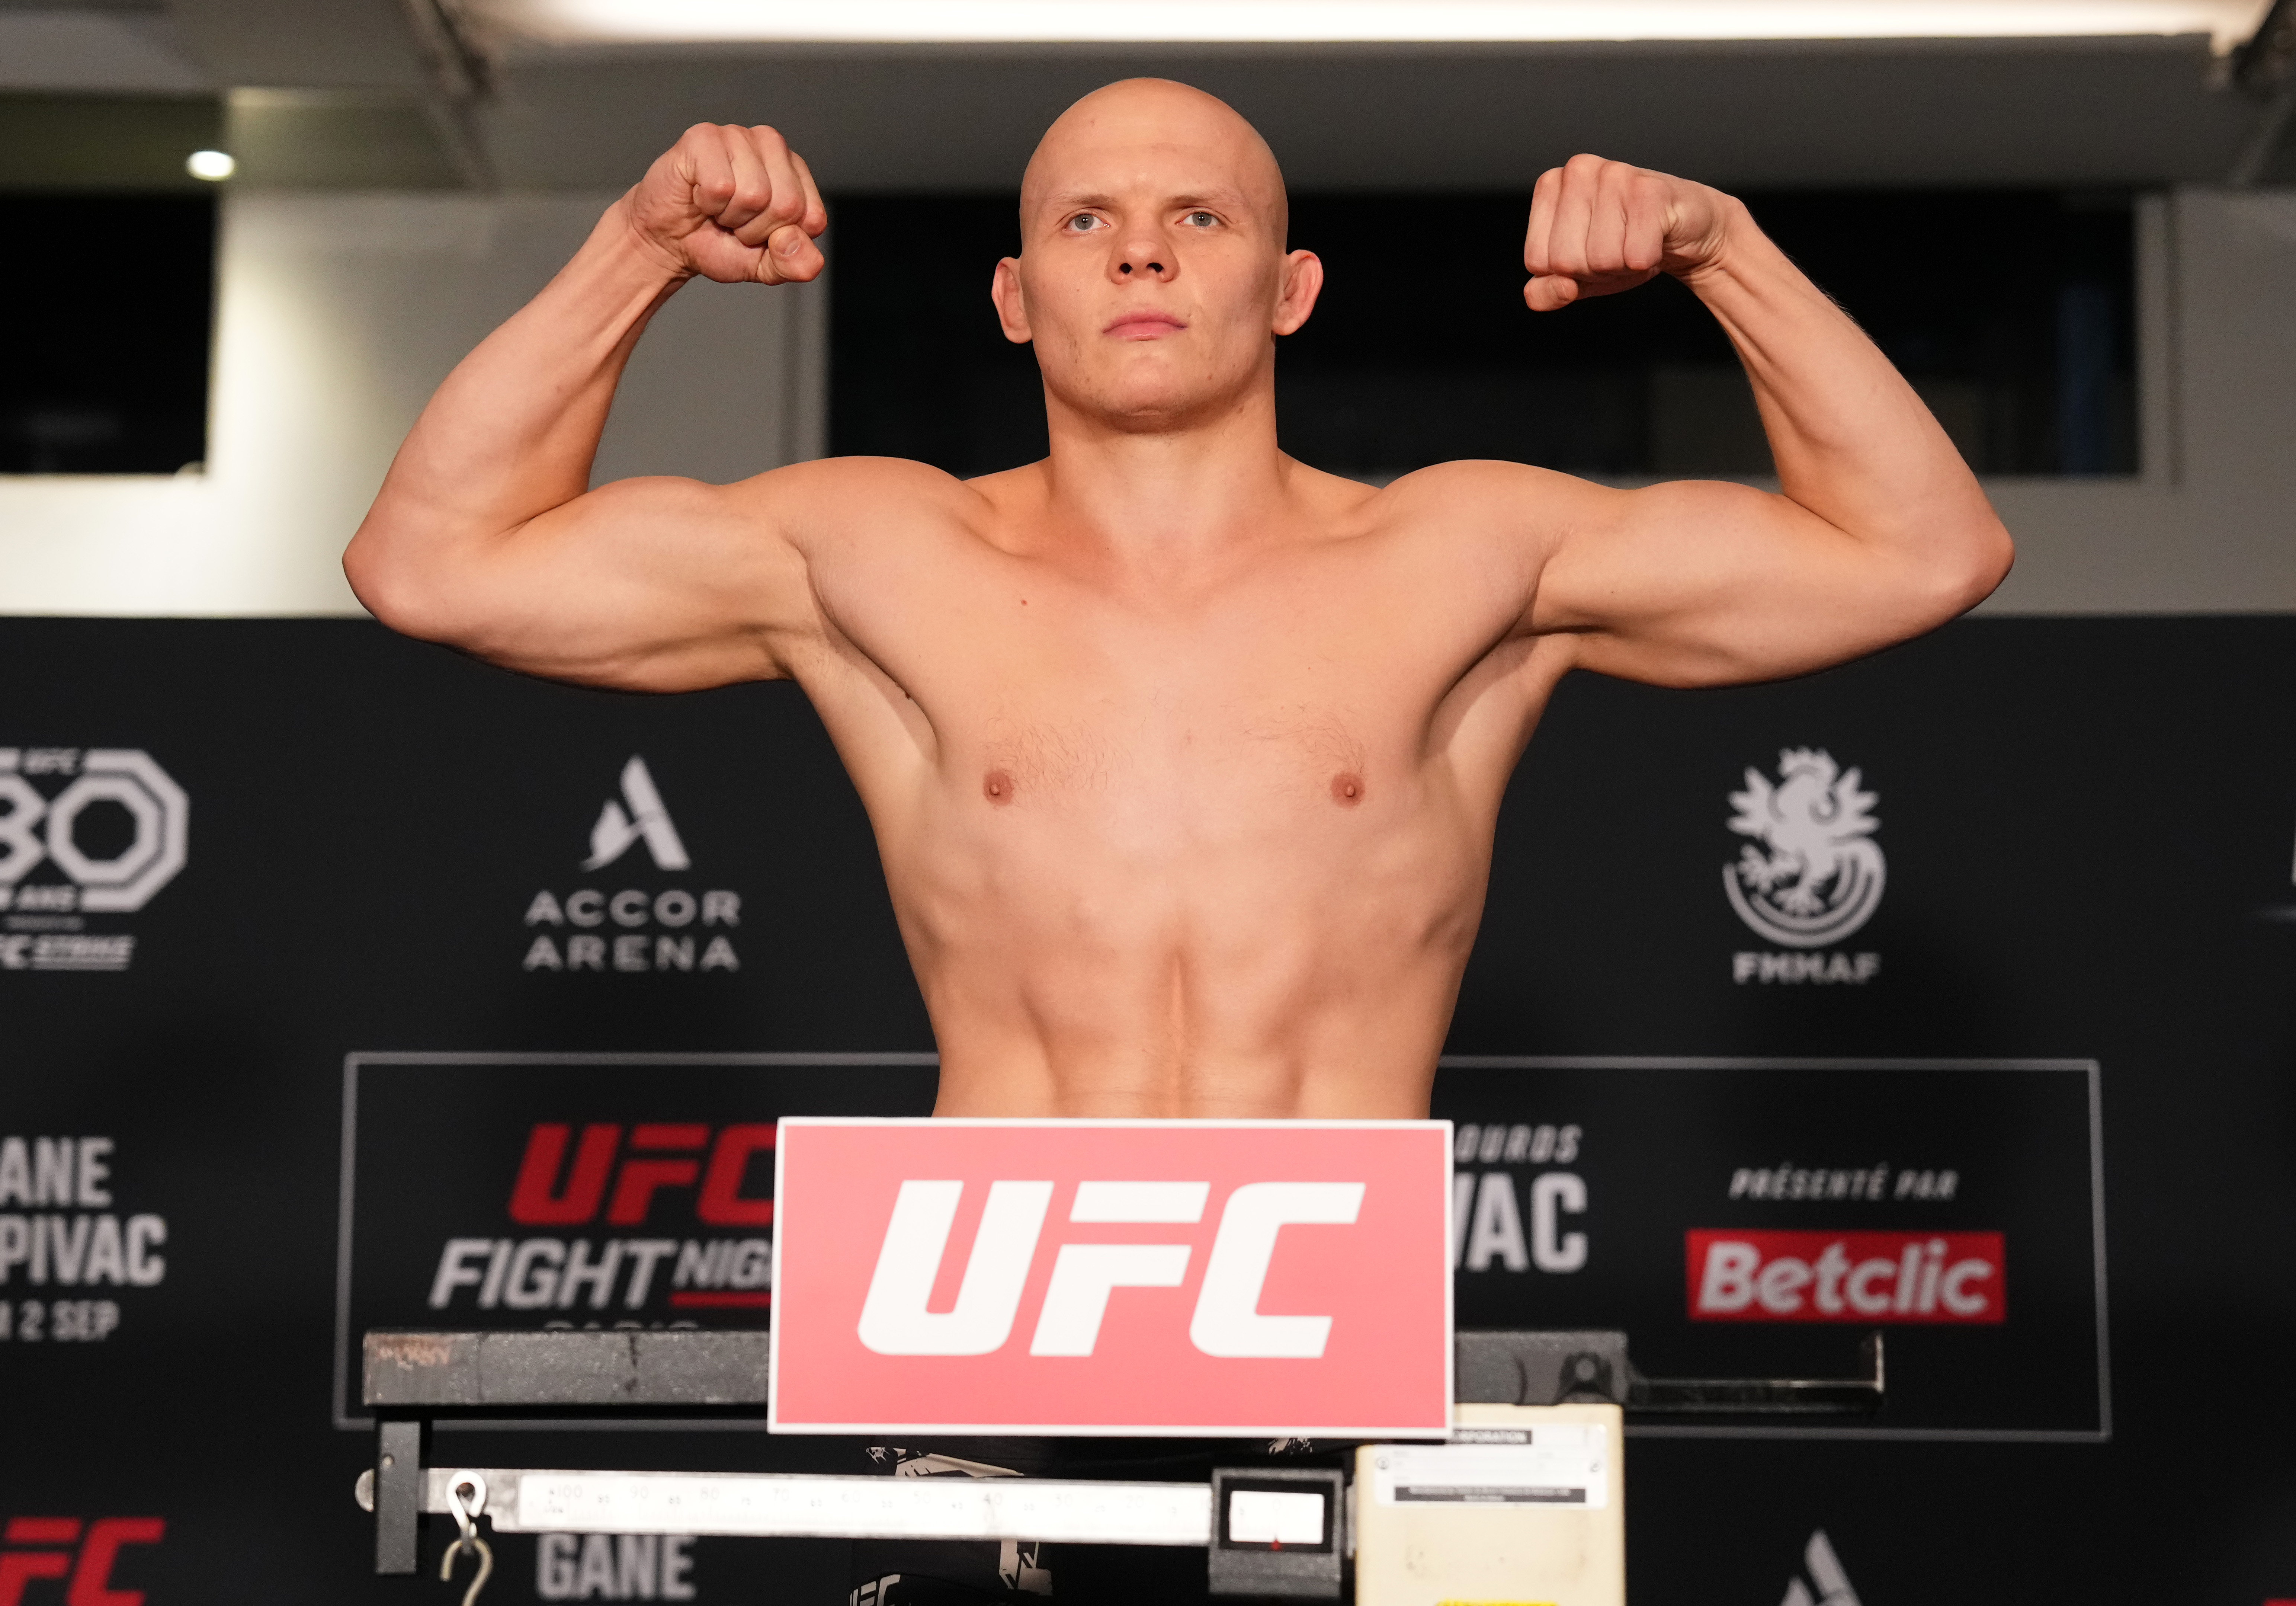 UFC Fight Night: Gane v Spivac Official Weigh-in